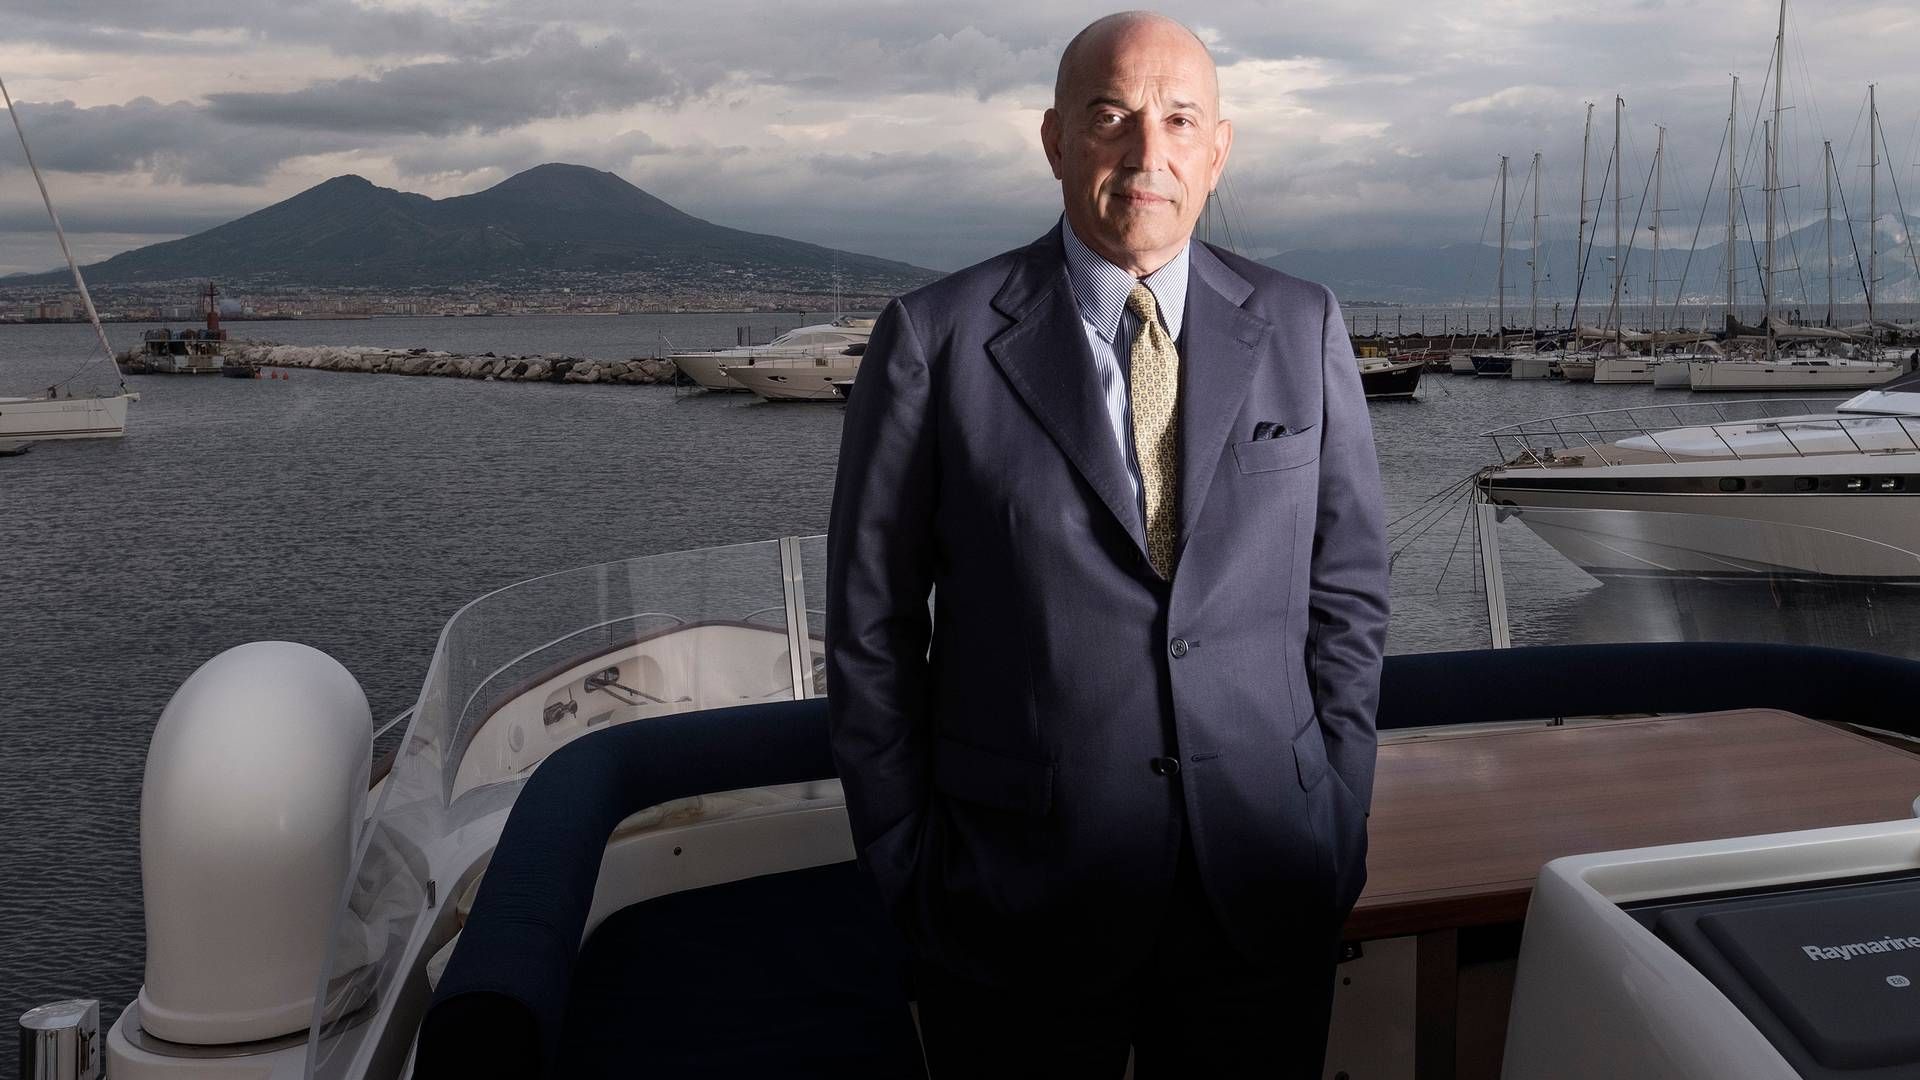 Grimaldi, led by CEO Emmanuele Grimaldi, is identified by Vessel Value's analyst as a possible buyer of competitors. | Photo: Pr-foto